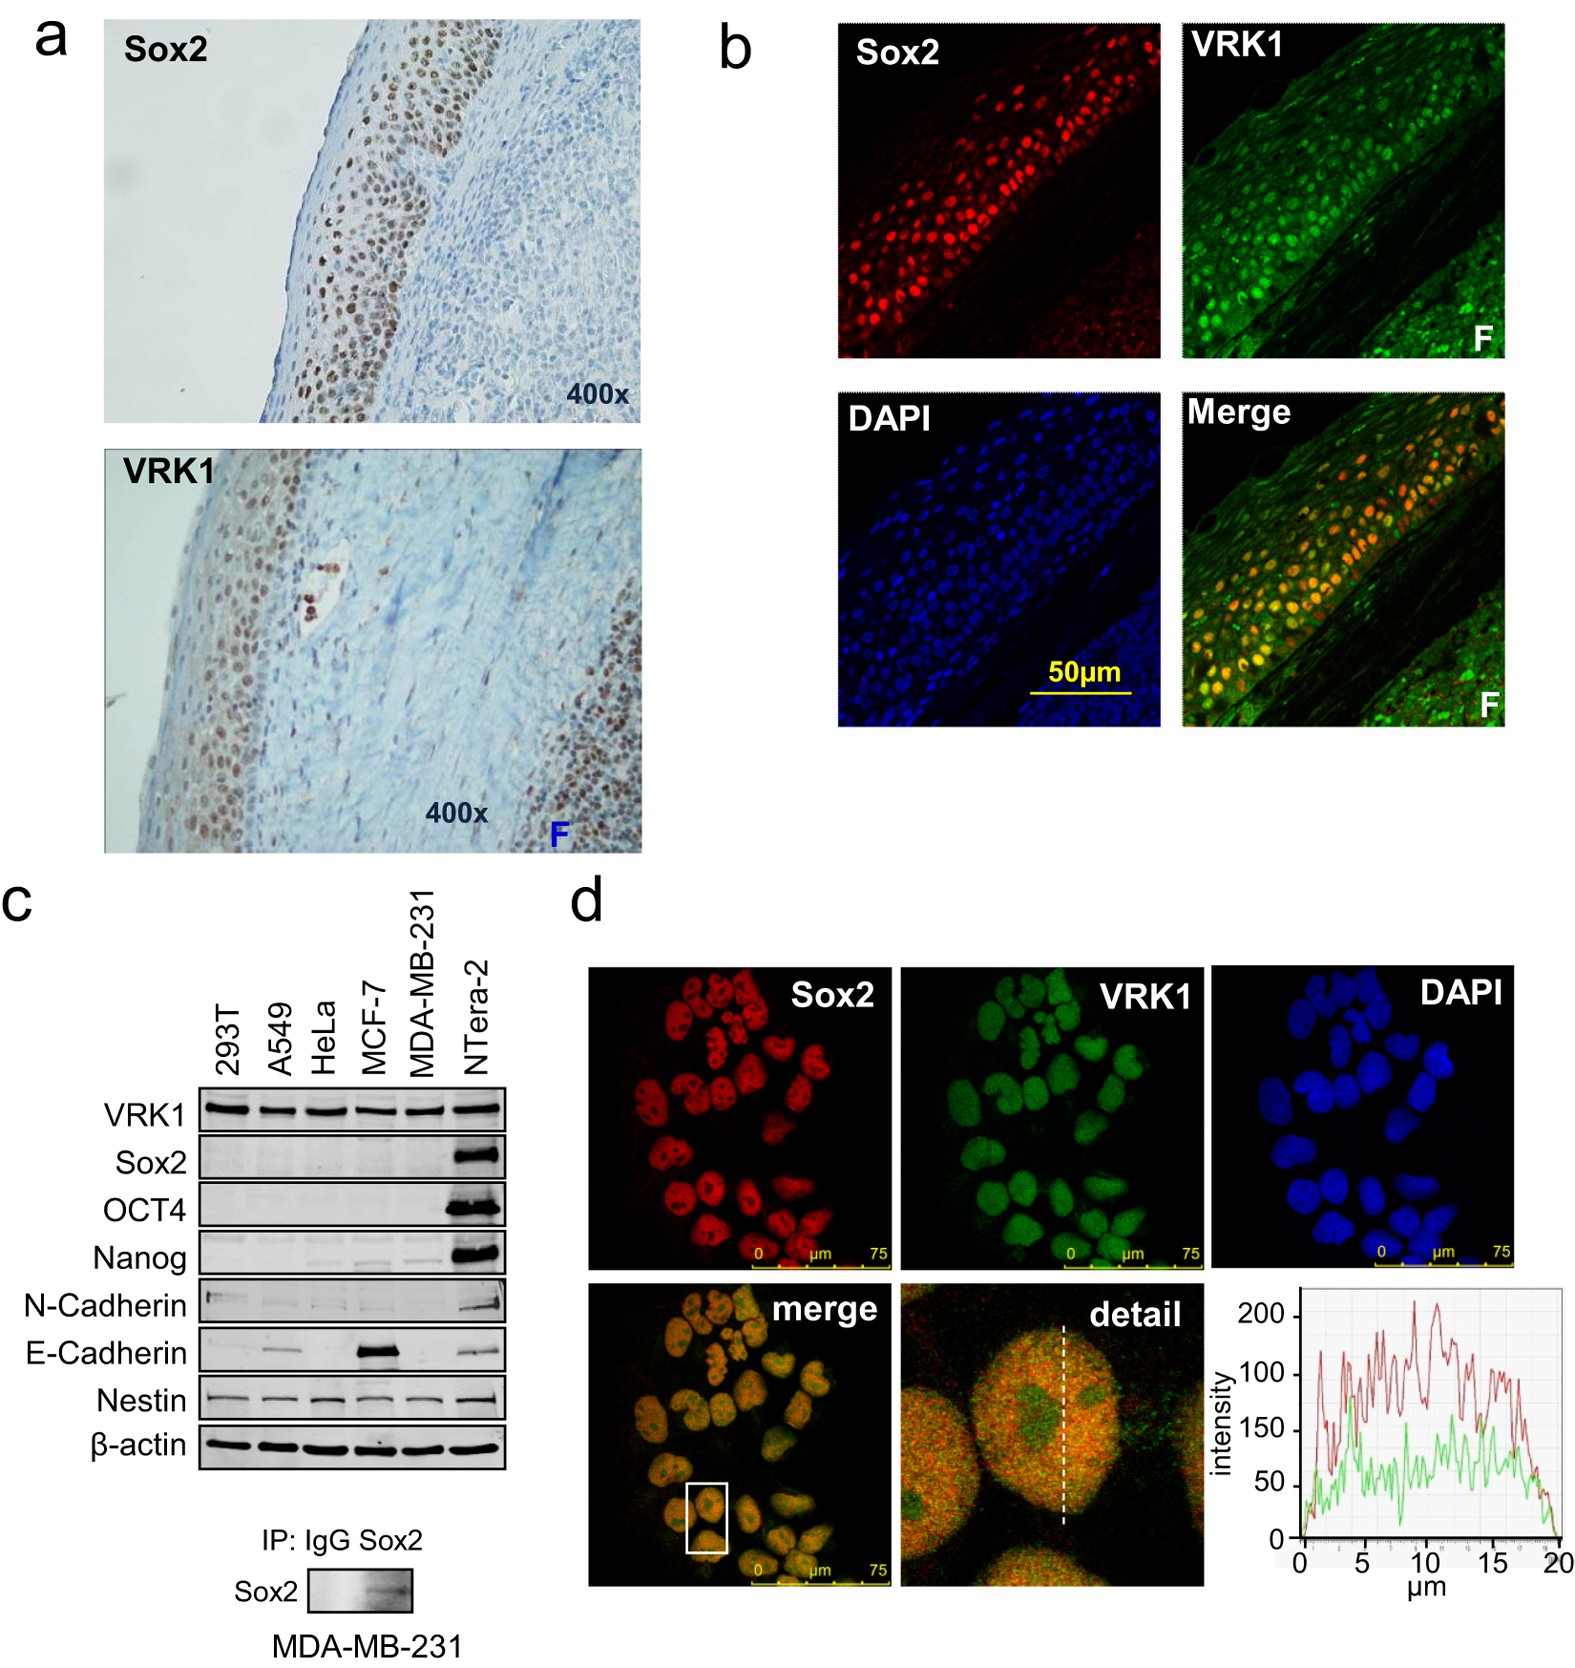 Usual Botany Acquisition Oncogenic Sox2 regulates and cooperates with VRK1 in cell cycle progression  and differentiation | Scientific Reports